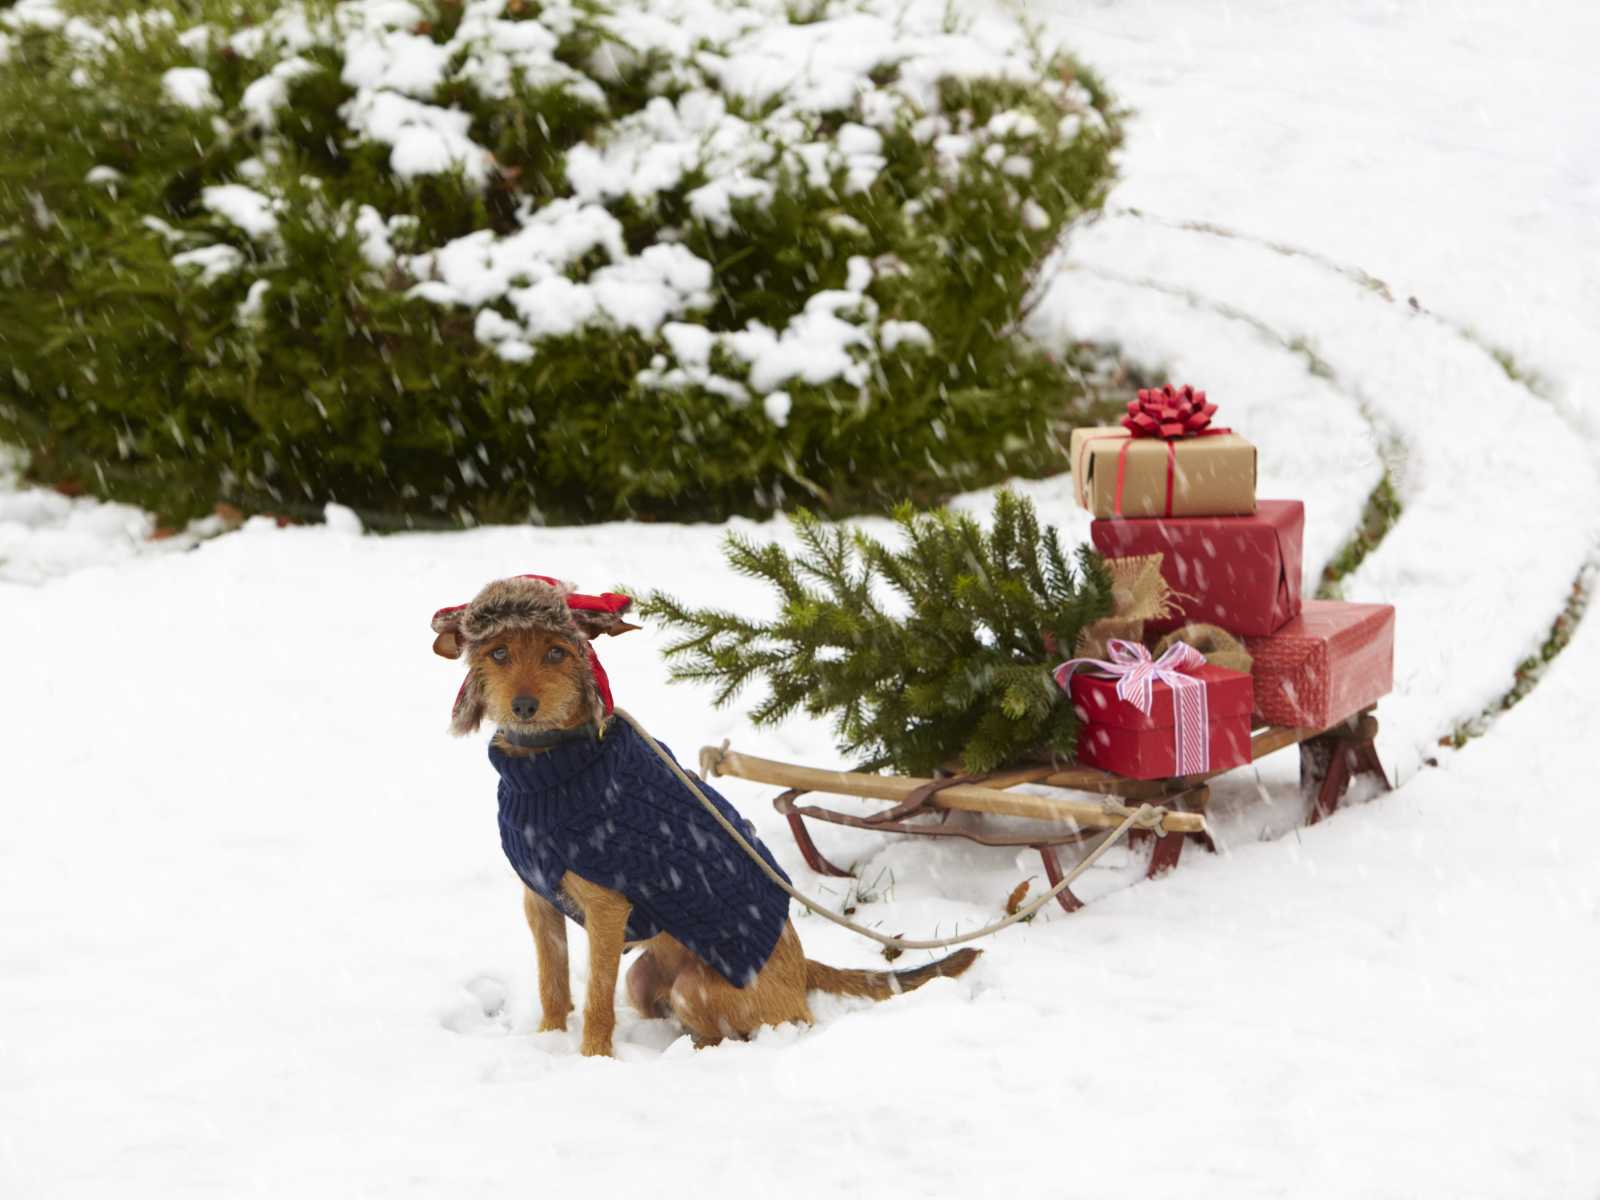 dog with winter hat and sweater on pulling sled with presents and pine tree in snow